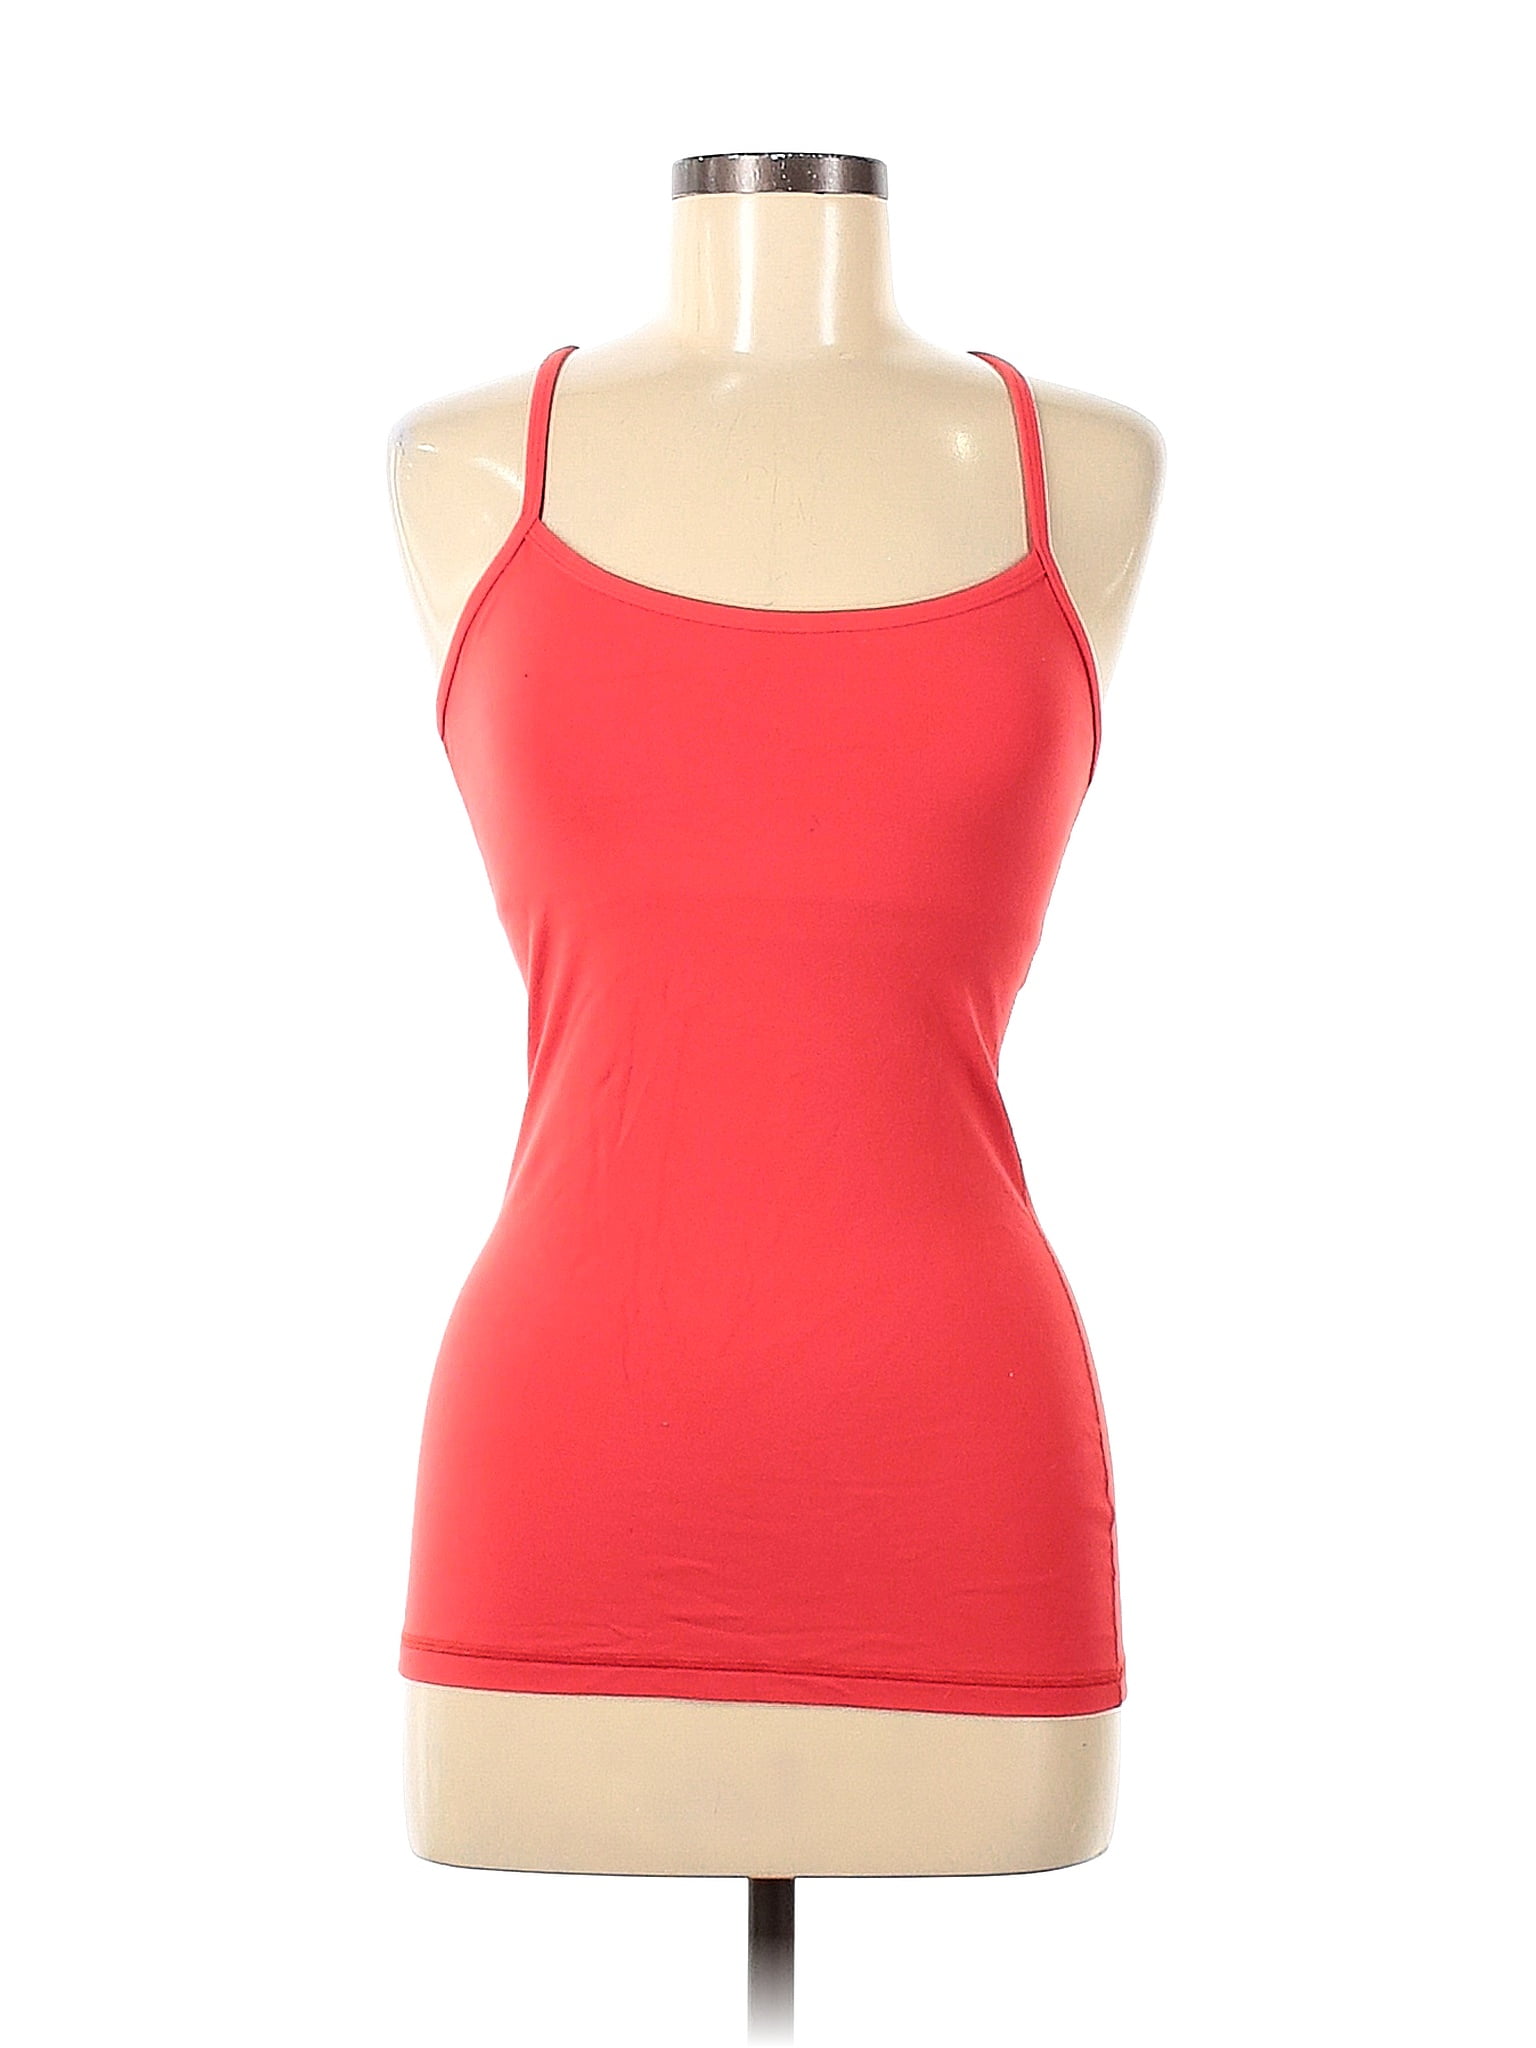 Pre-Owned Lululemon Athletica Womens Size 8 Tank Top Algeria